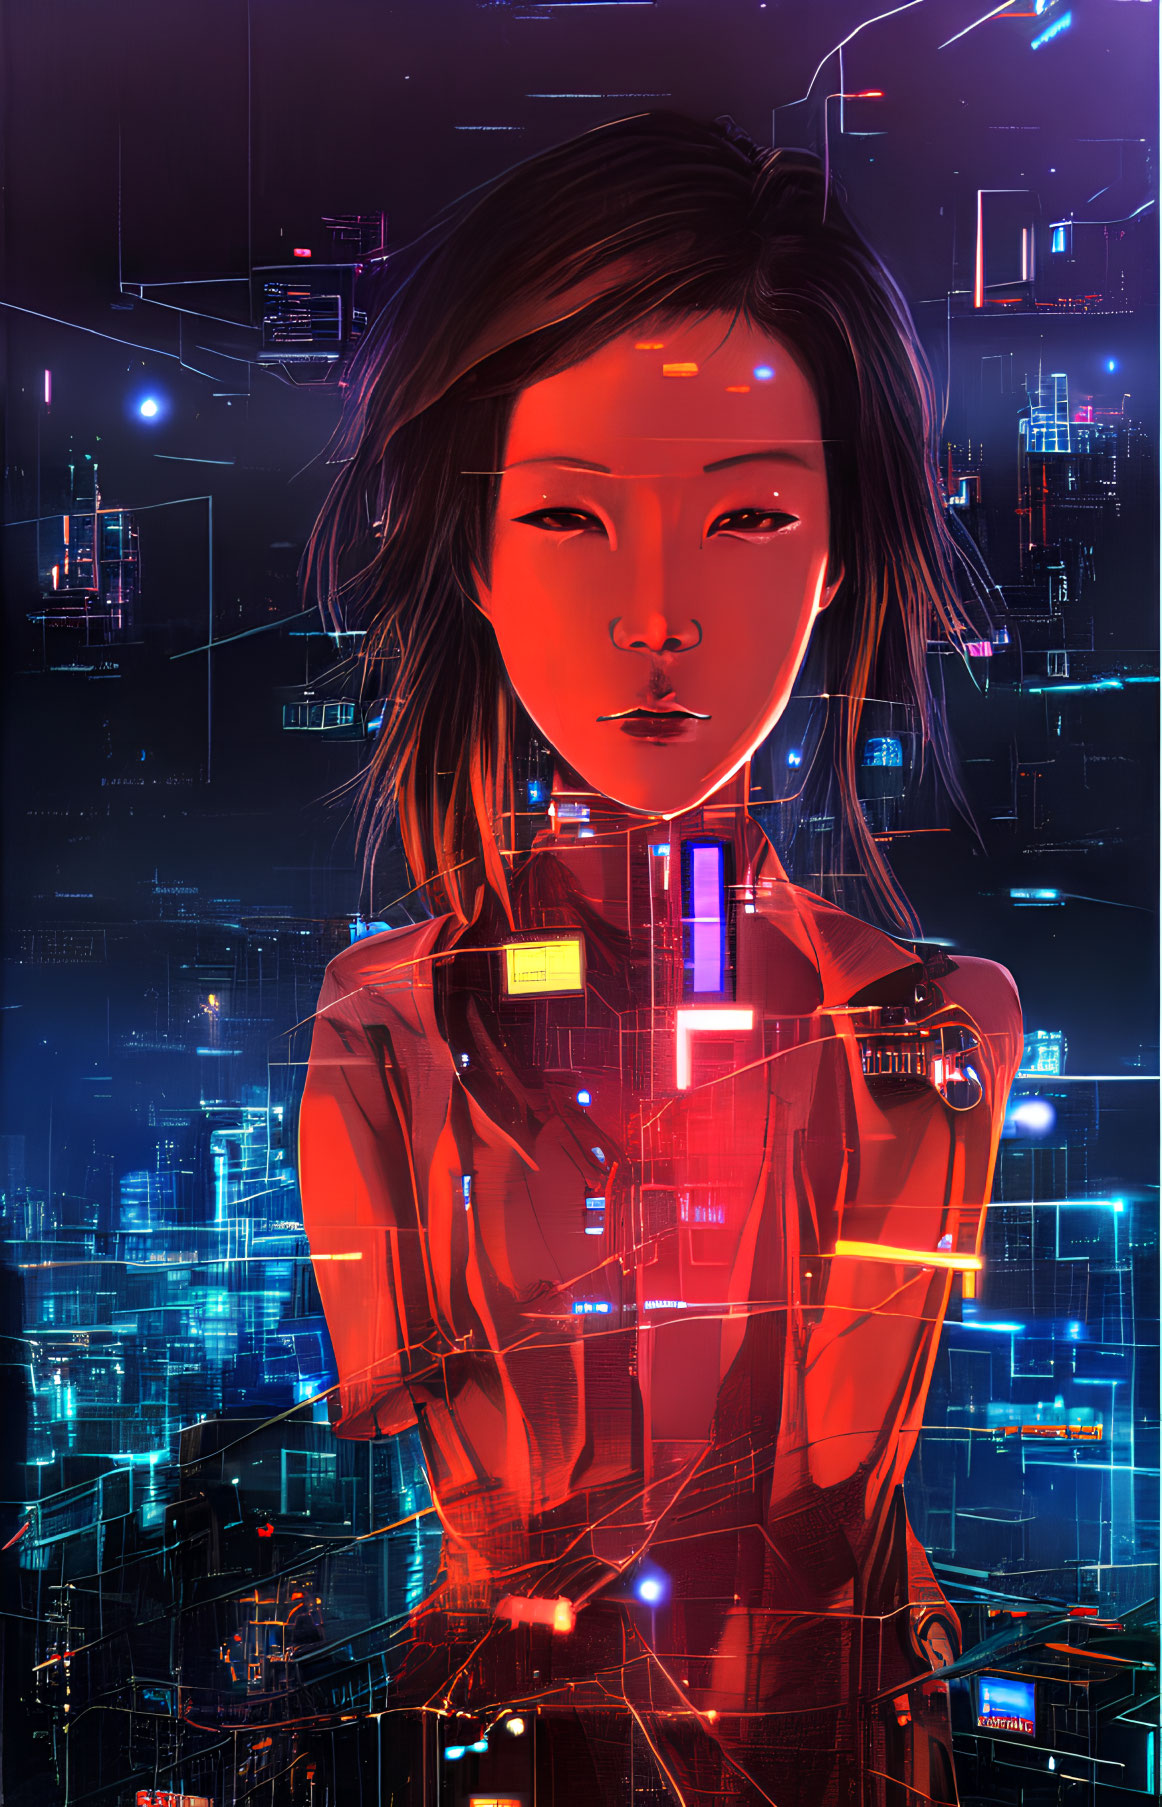 Ethereal woman in futuristic cityscape with neon lights and data streams